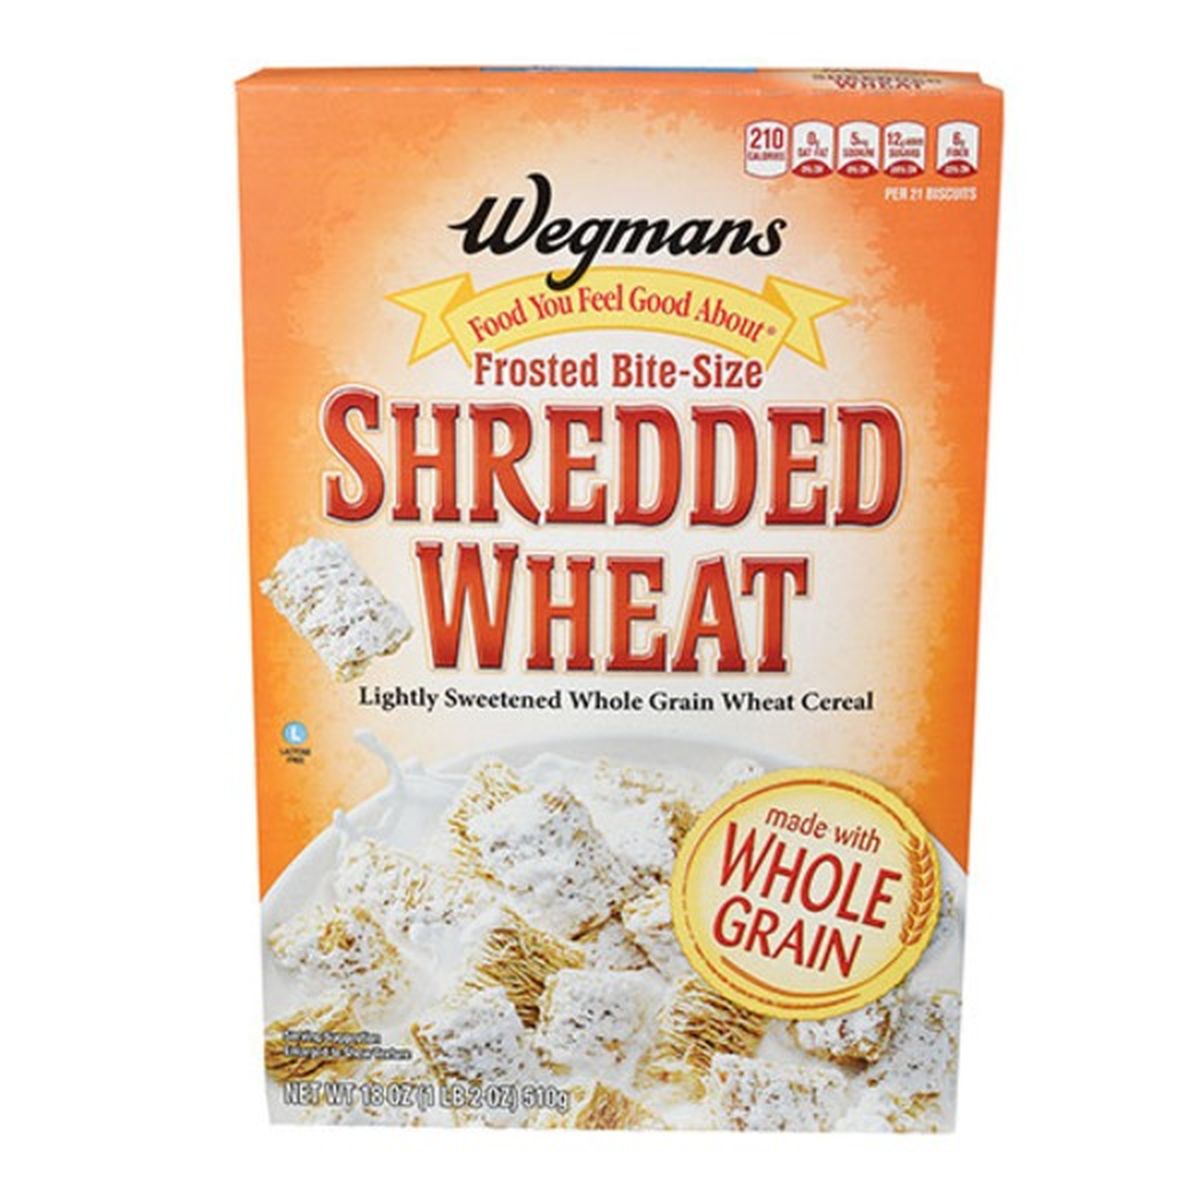 Calories in Wegmans Frosted Bite-Size Shredded Wheat Cereal